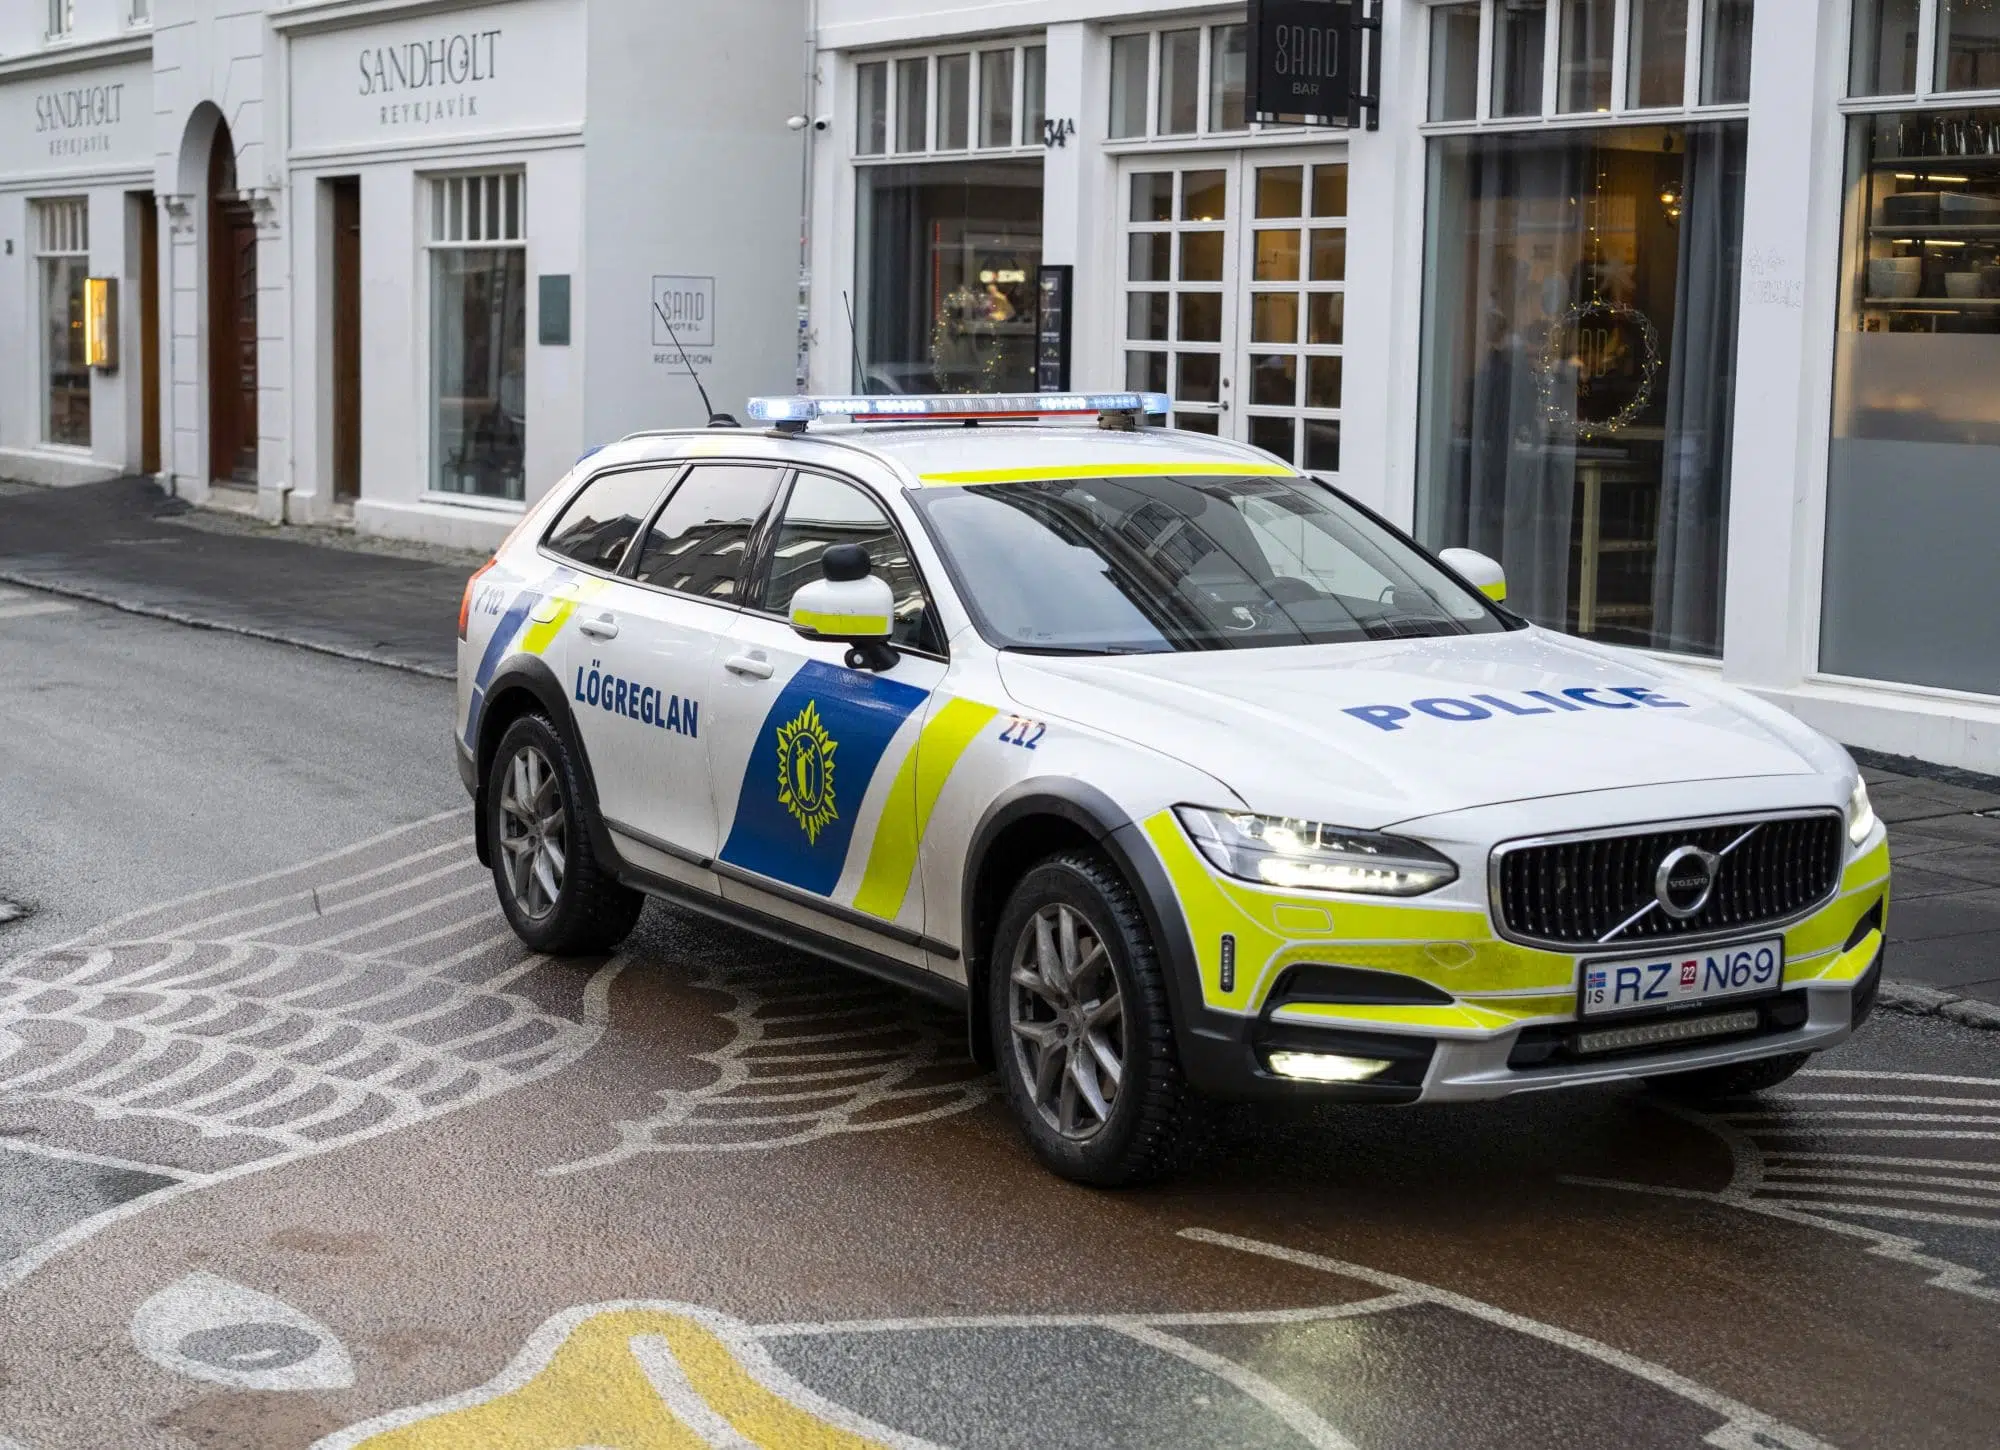 Icelandic Police Department Deactivates Facebook Page Over Data Safety Concerns